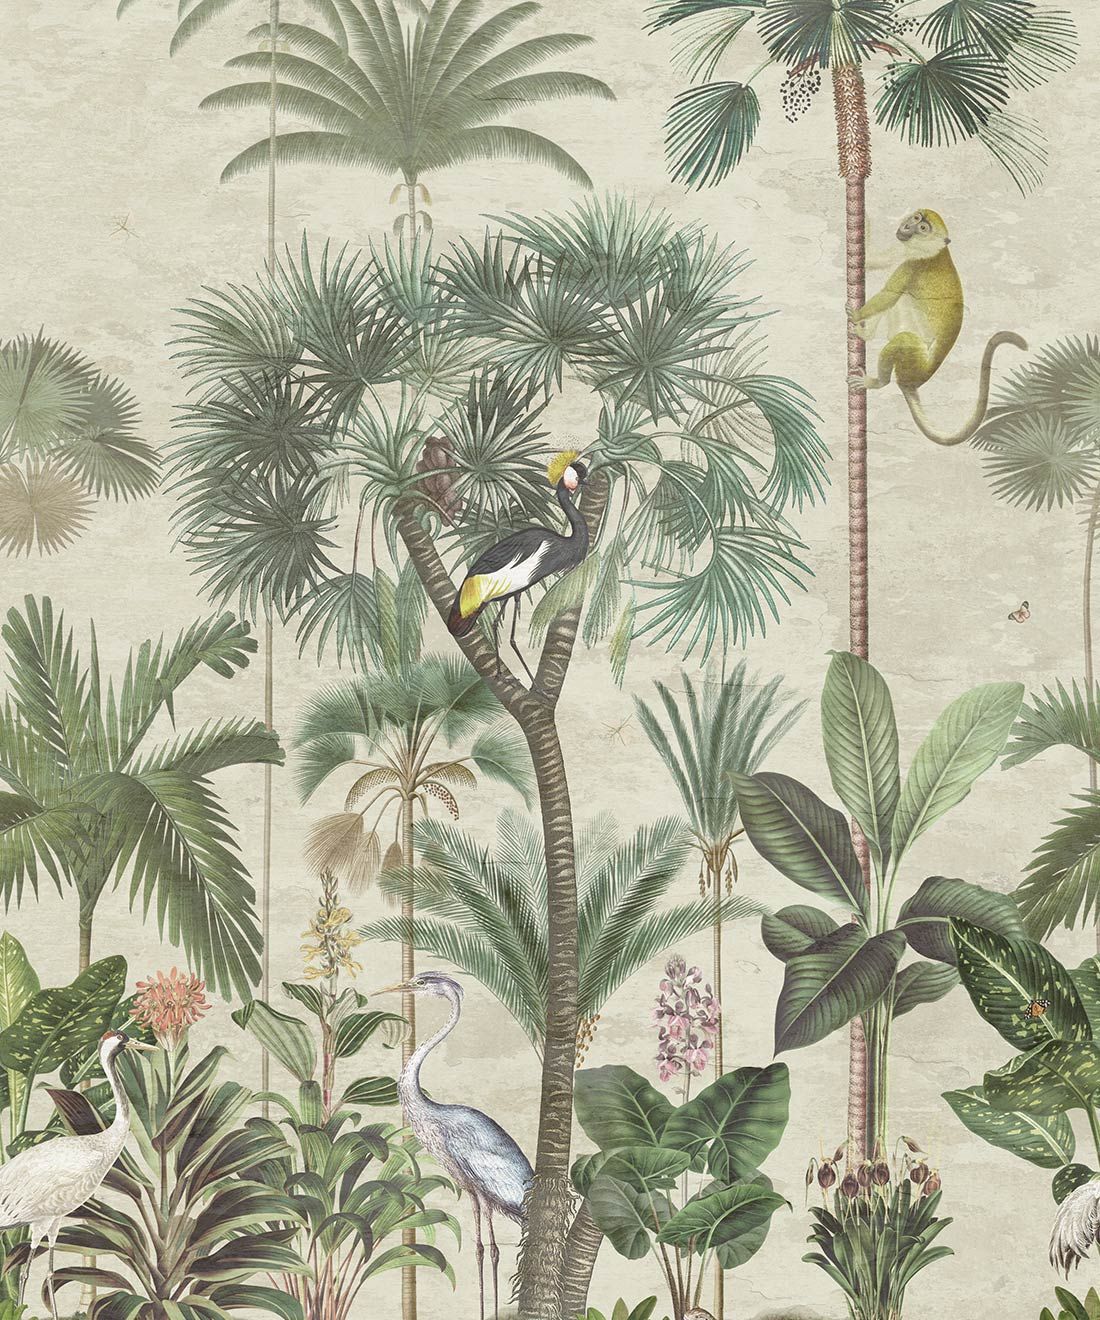 Buy Tropical Wallpaper Online In India - Etsy India